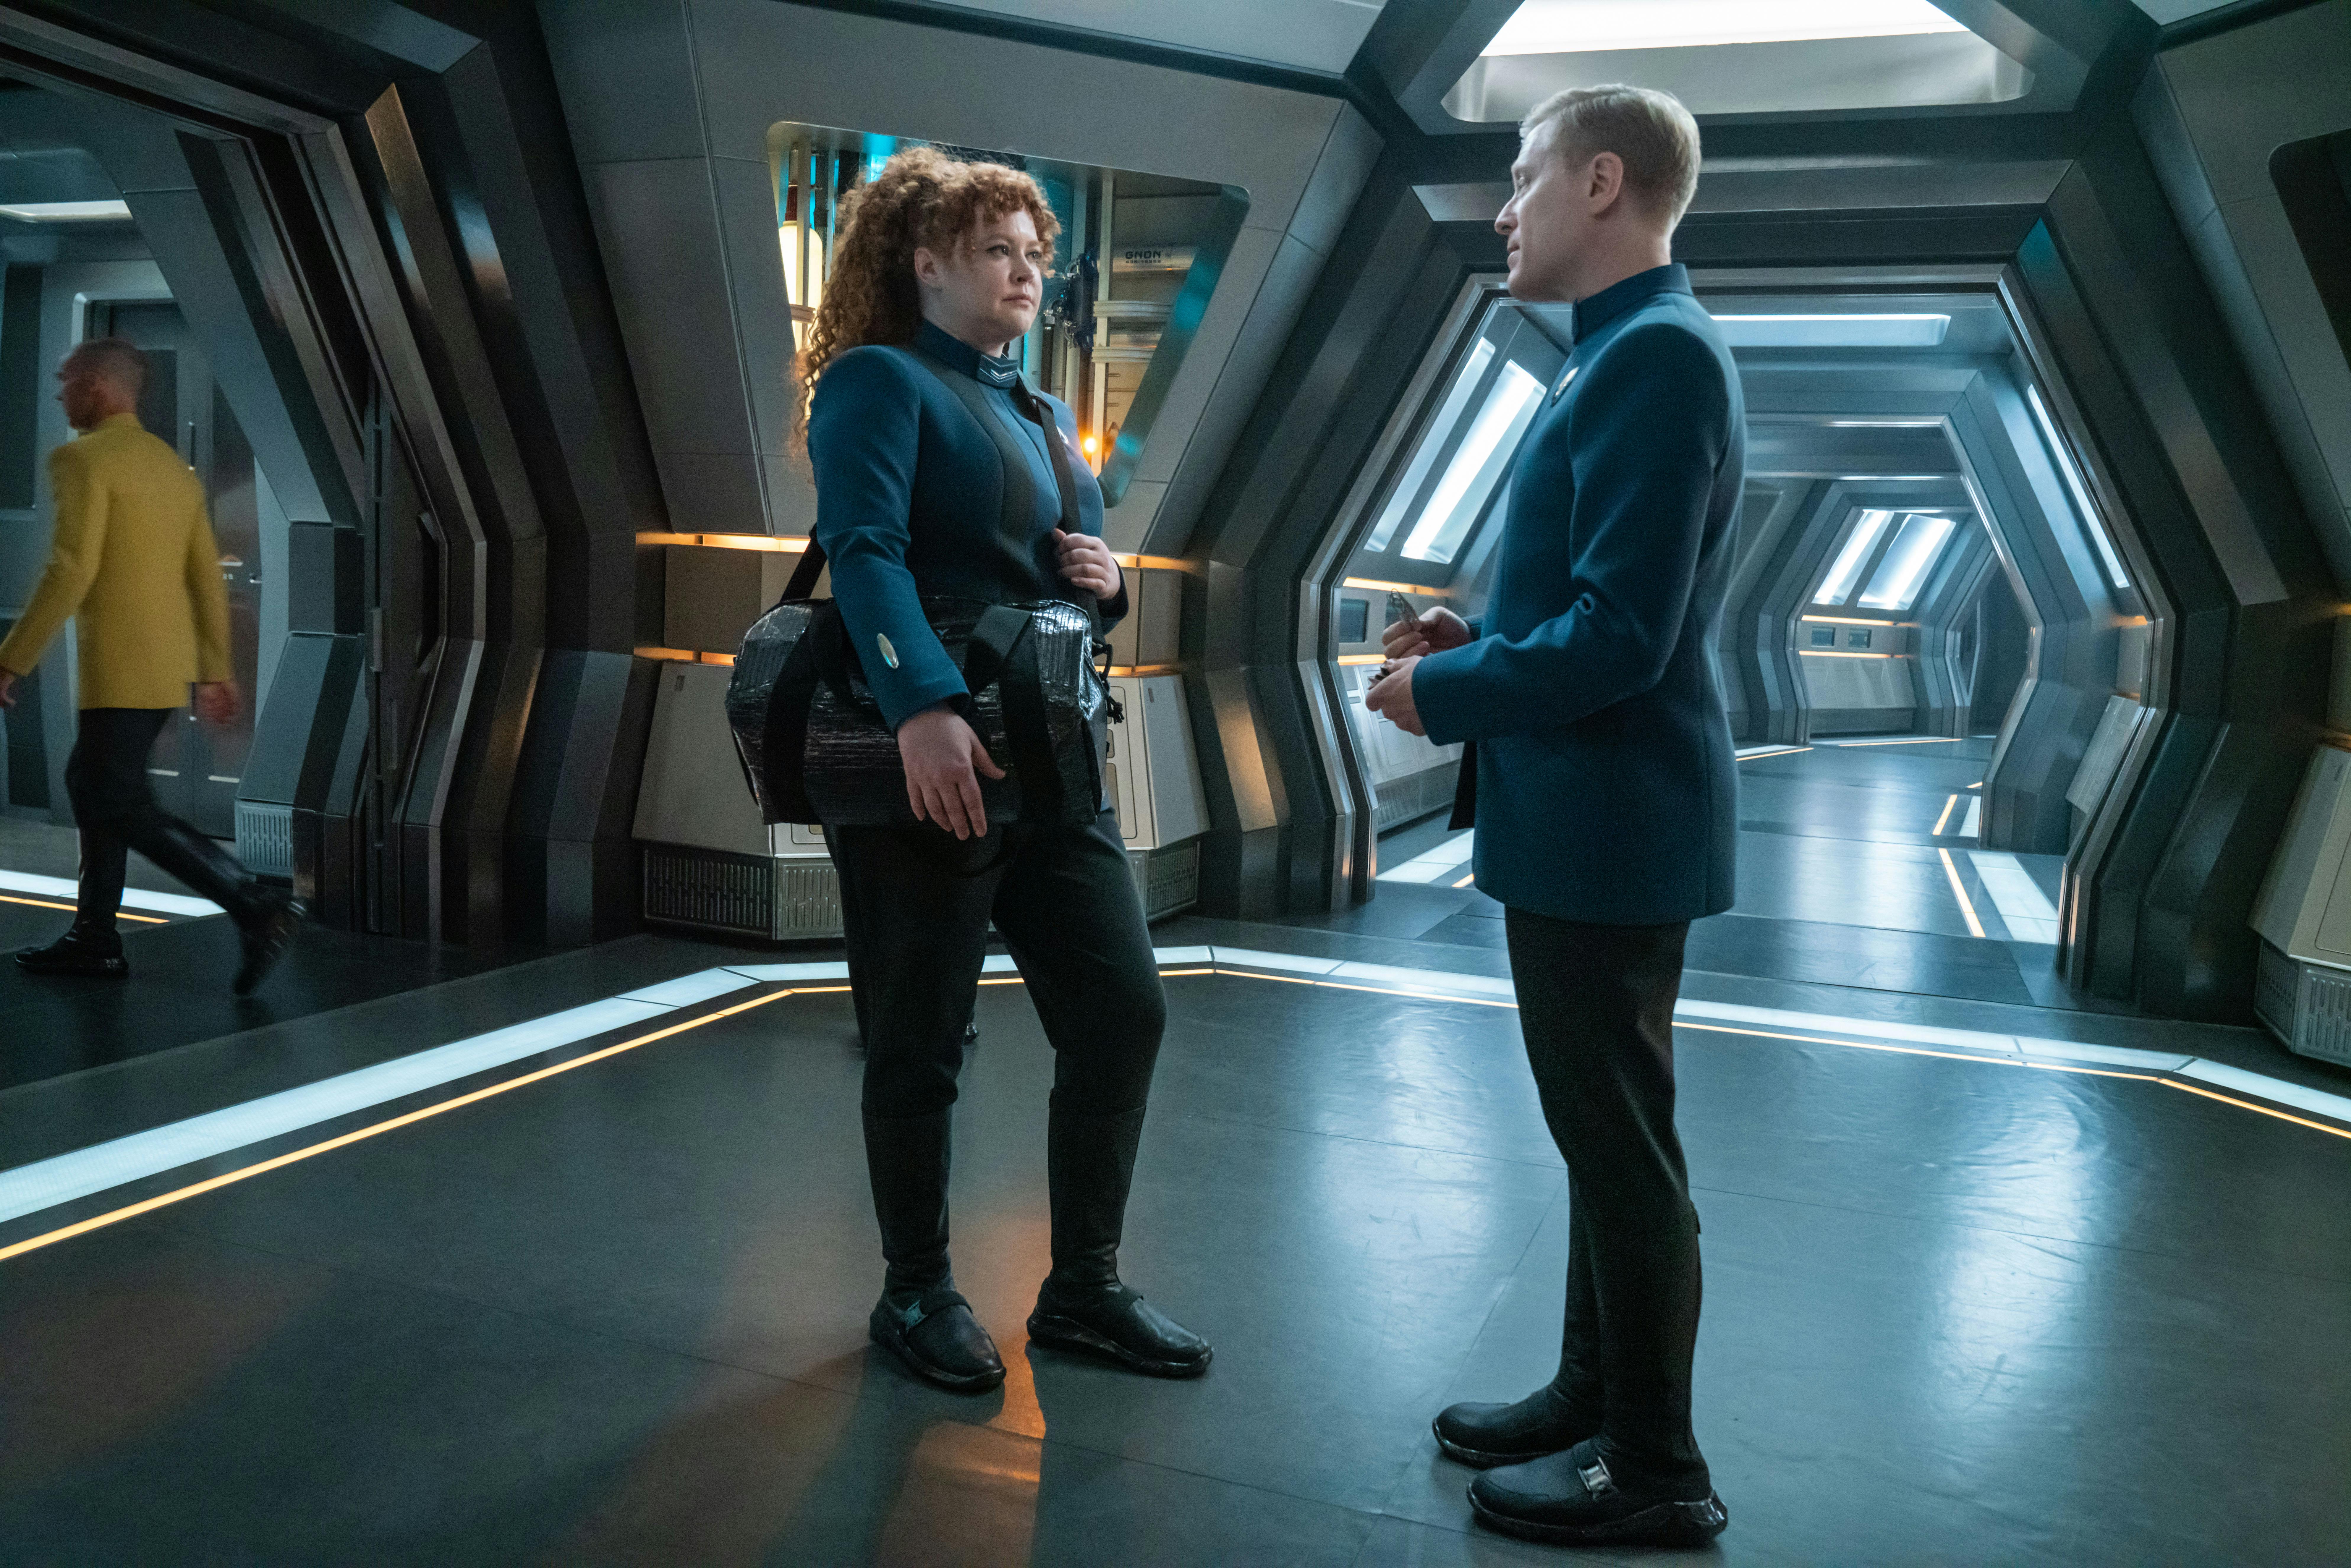 Carrying a go-bag, Tilly approaches Stamets in a Discovery corridor in 'Erigah'